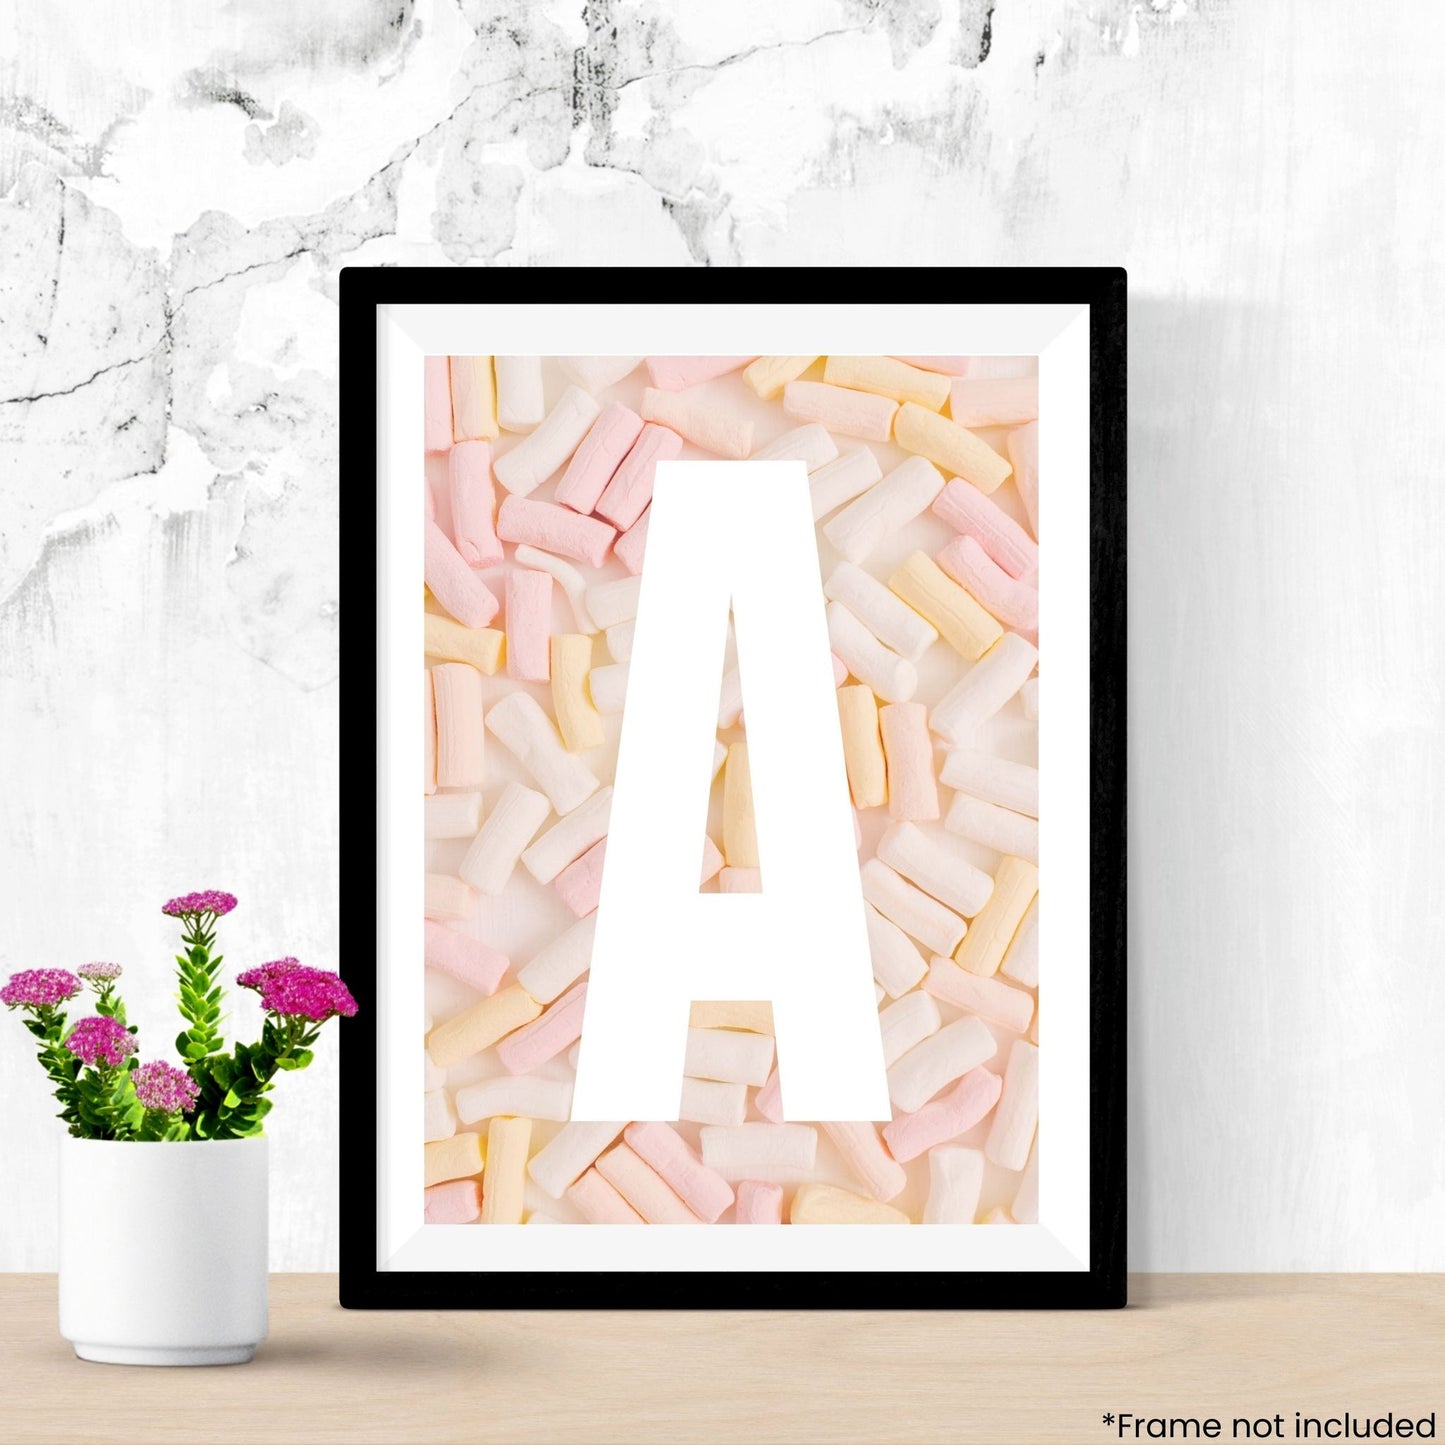 sweet-thing-letter-print in frame